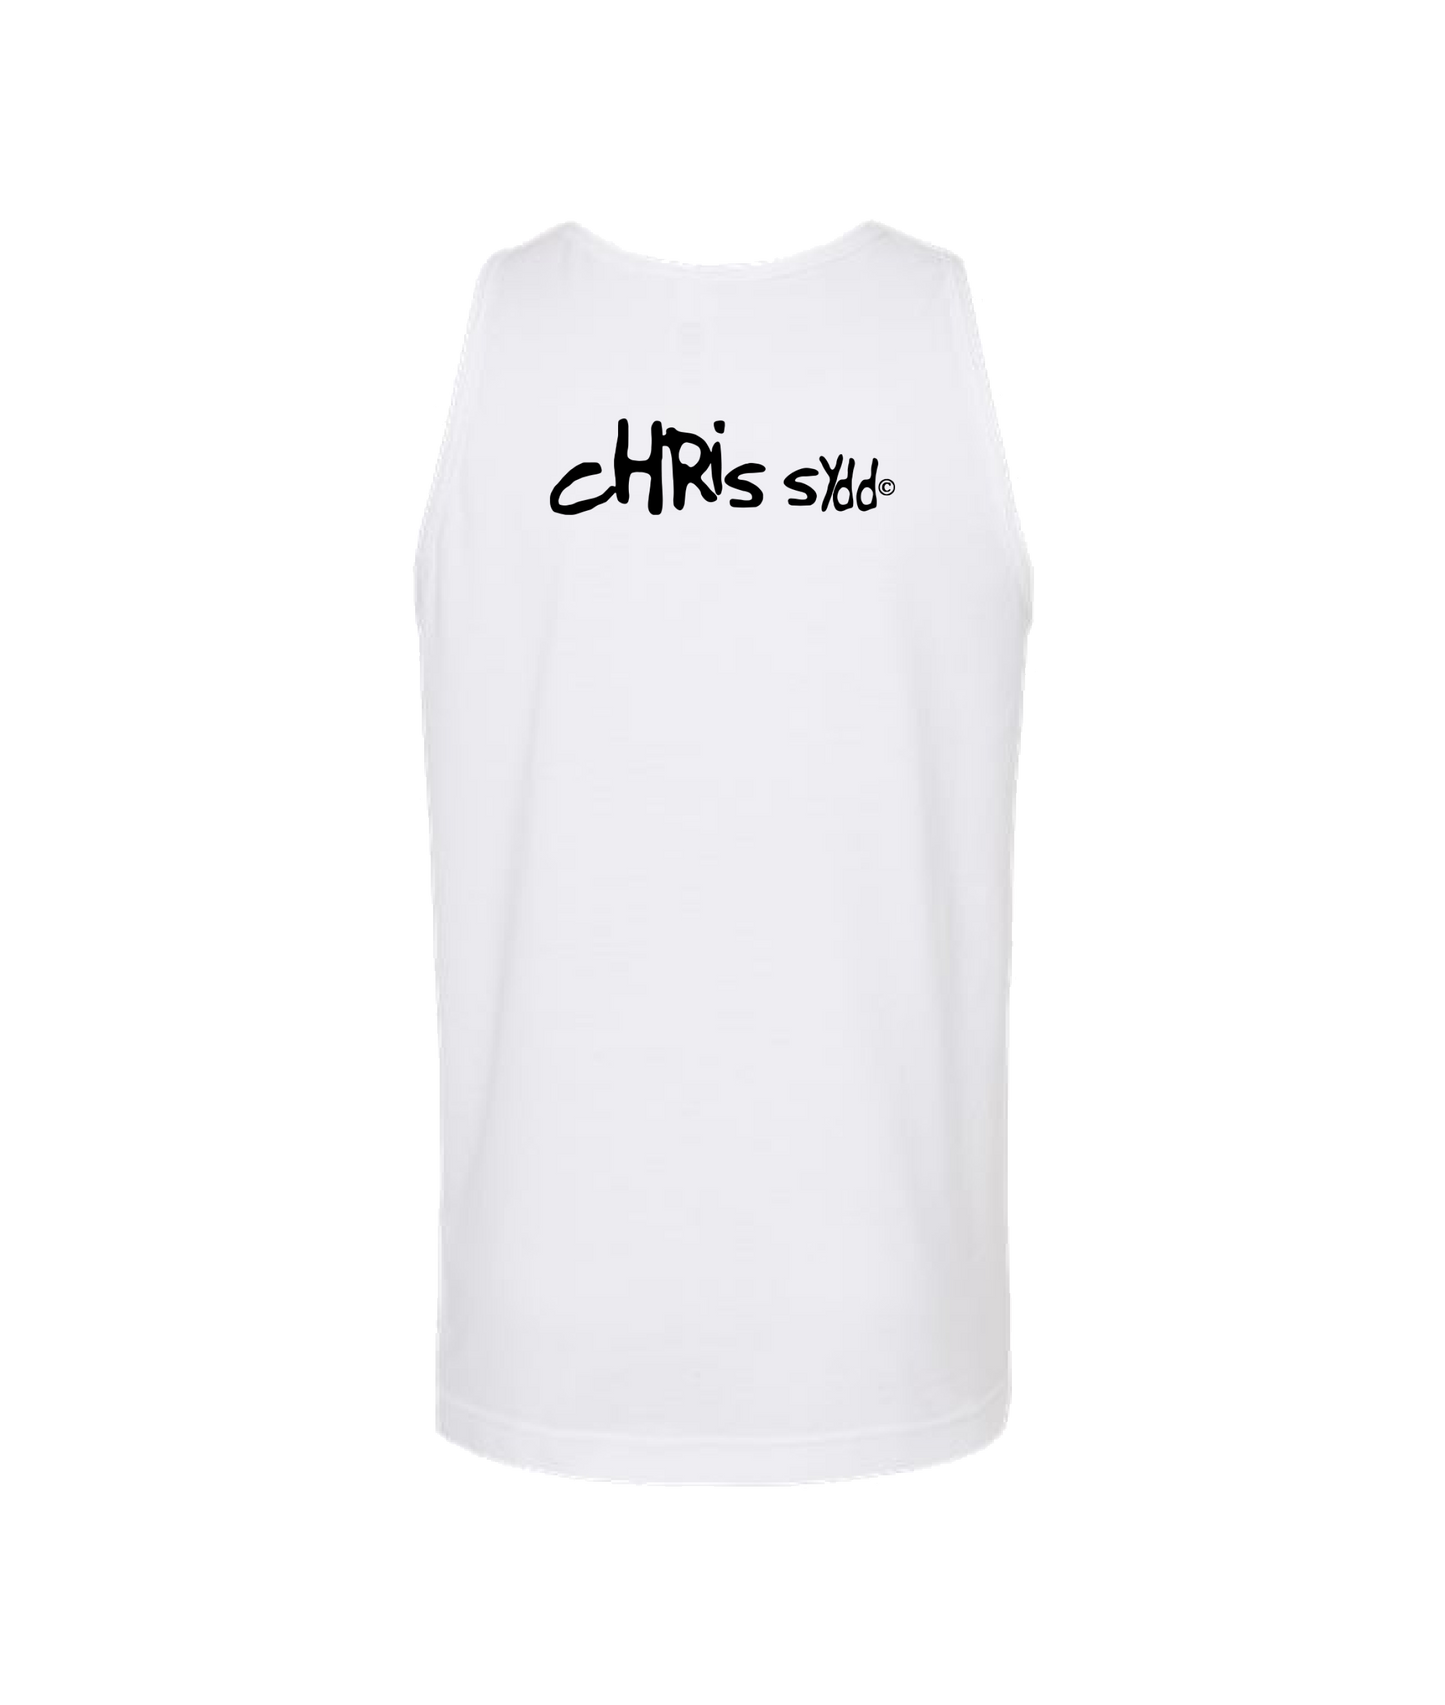 CHRIS SYDD - It Looks Just As Stupid When You Do It. - White Tank Top